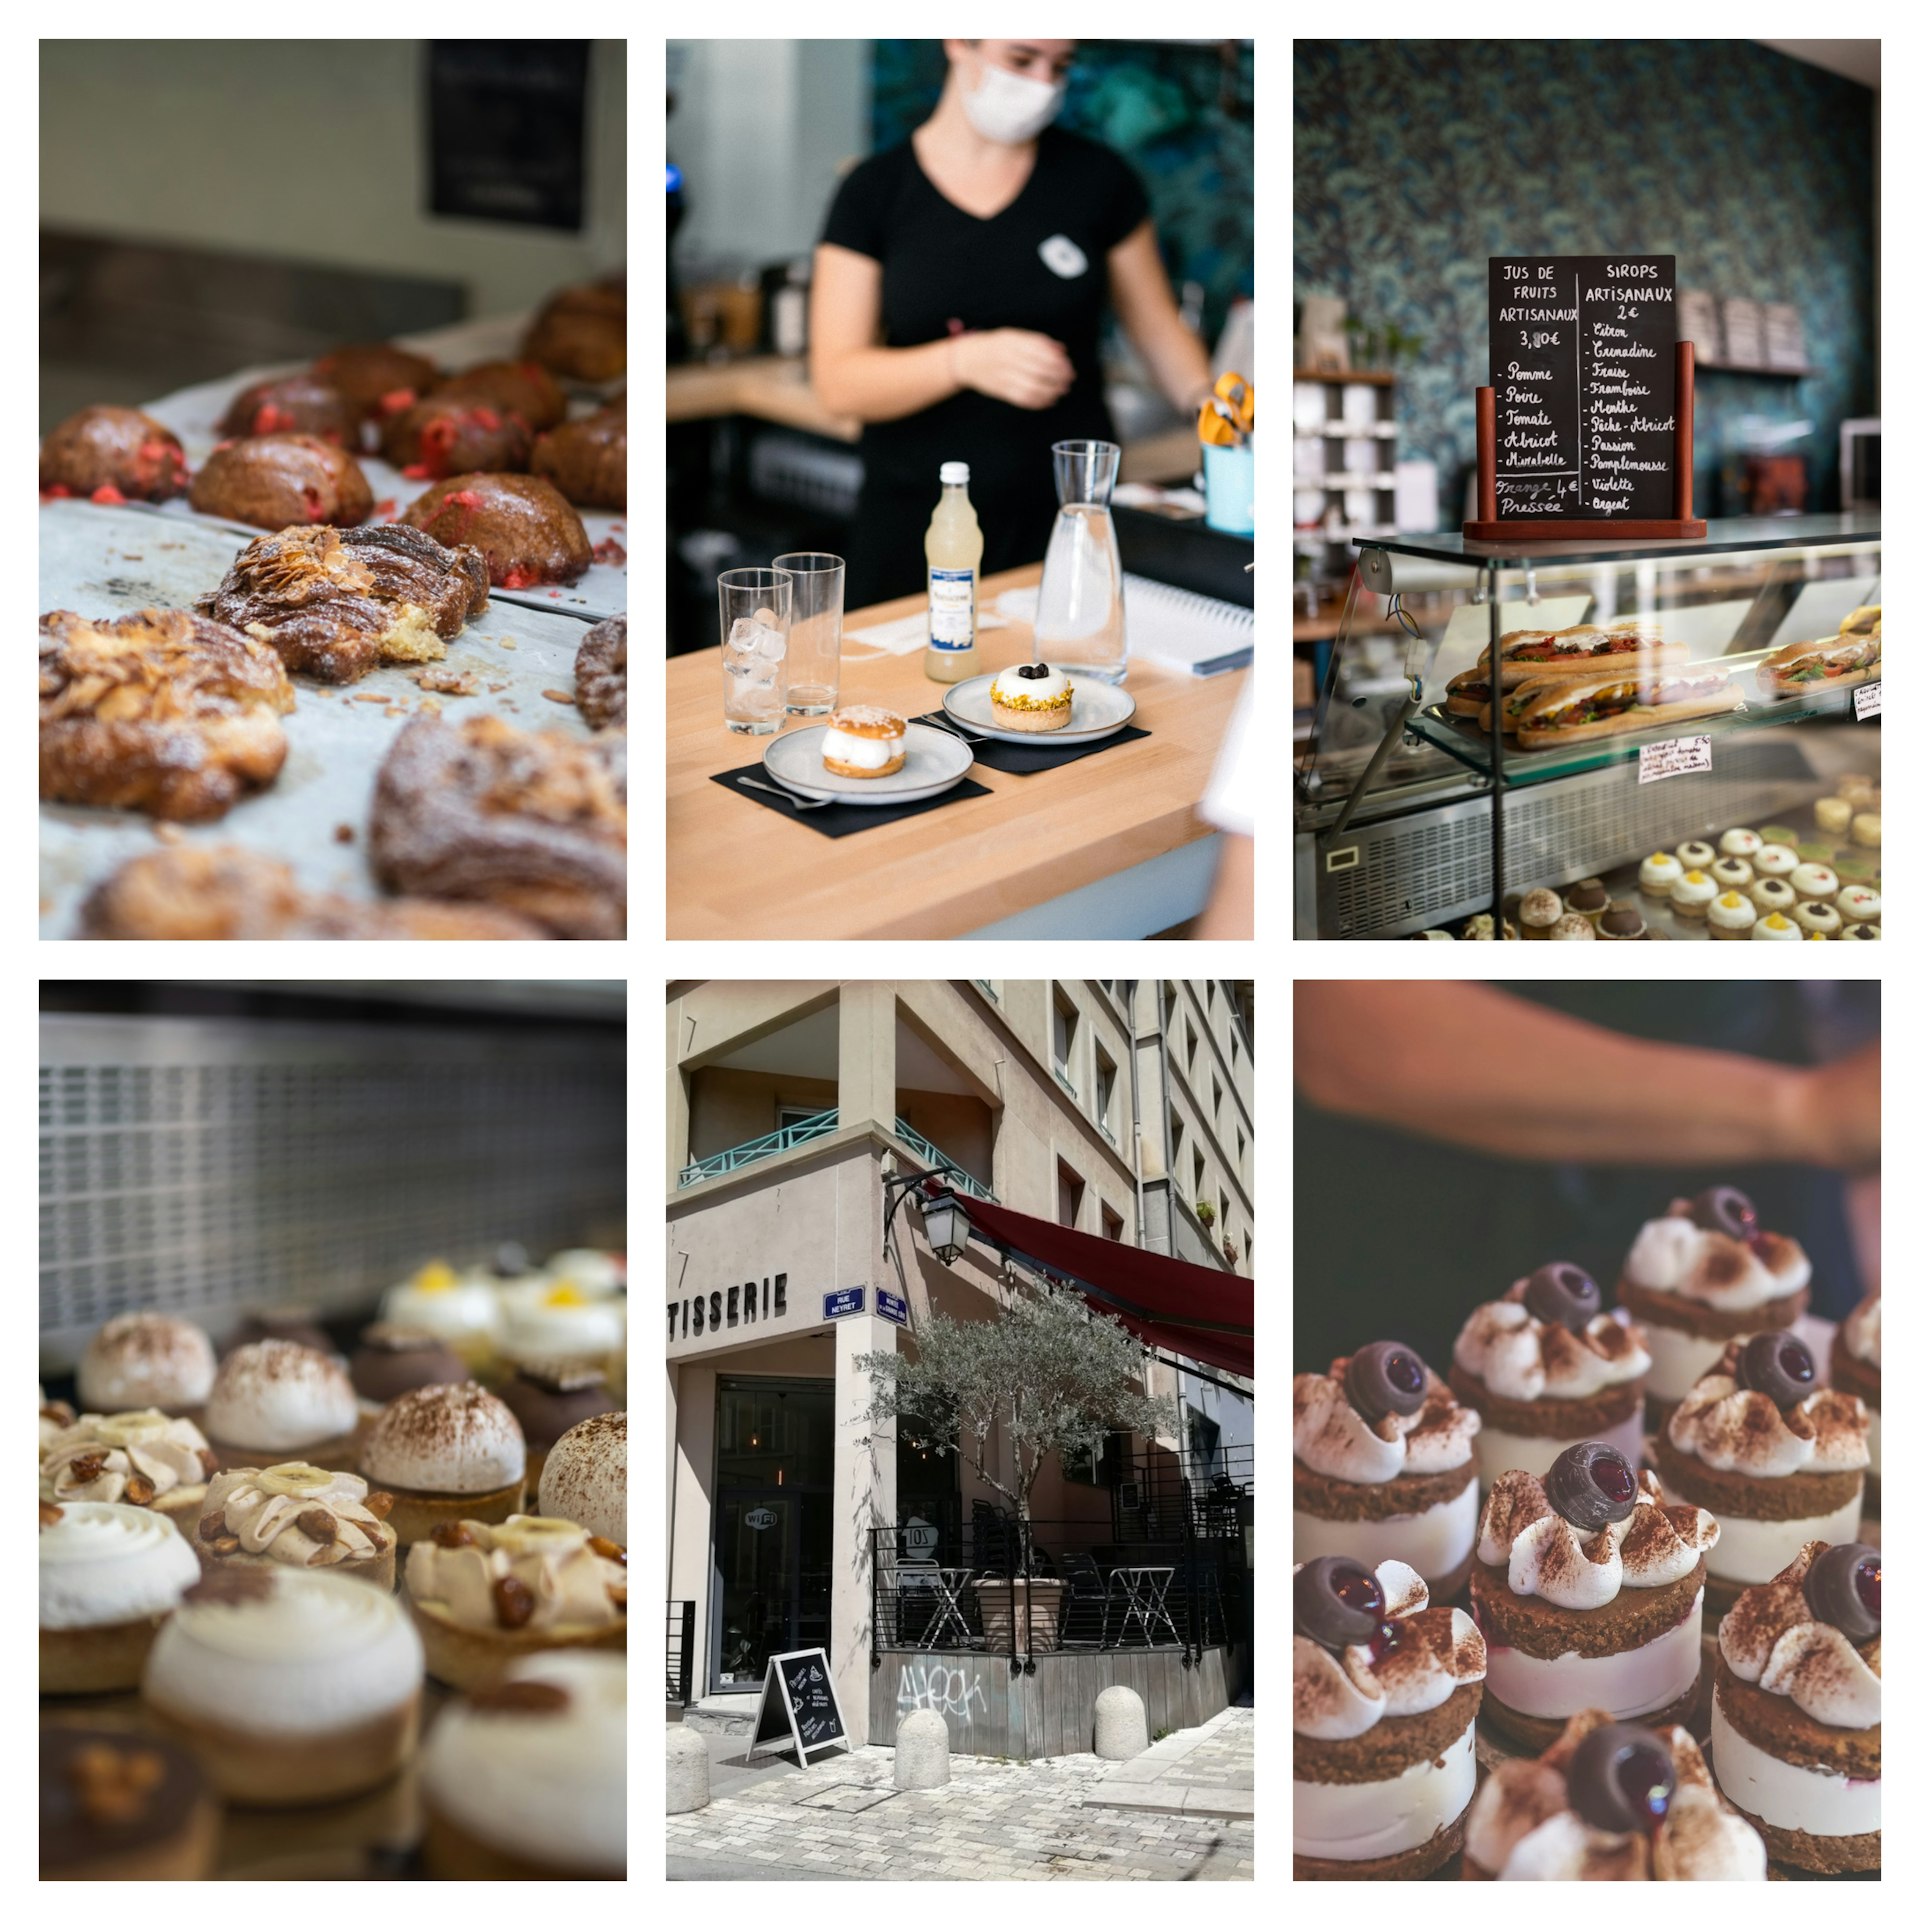 Highlights from Lyon's delicious bakeries